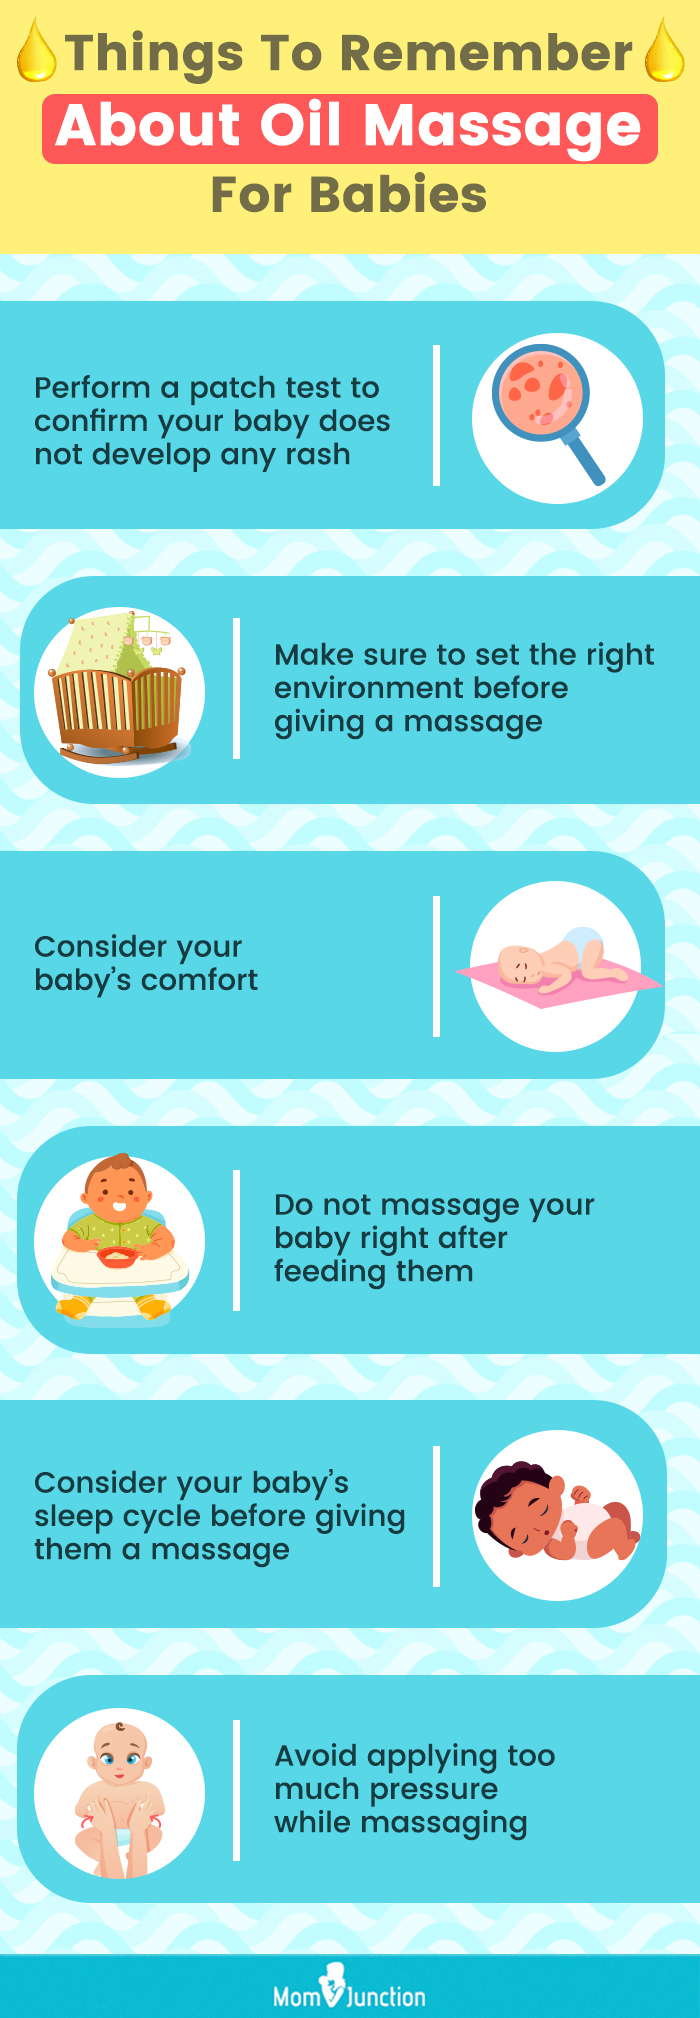 things to remember about oil massage for babies [infographic]